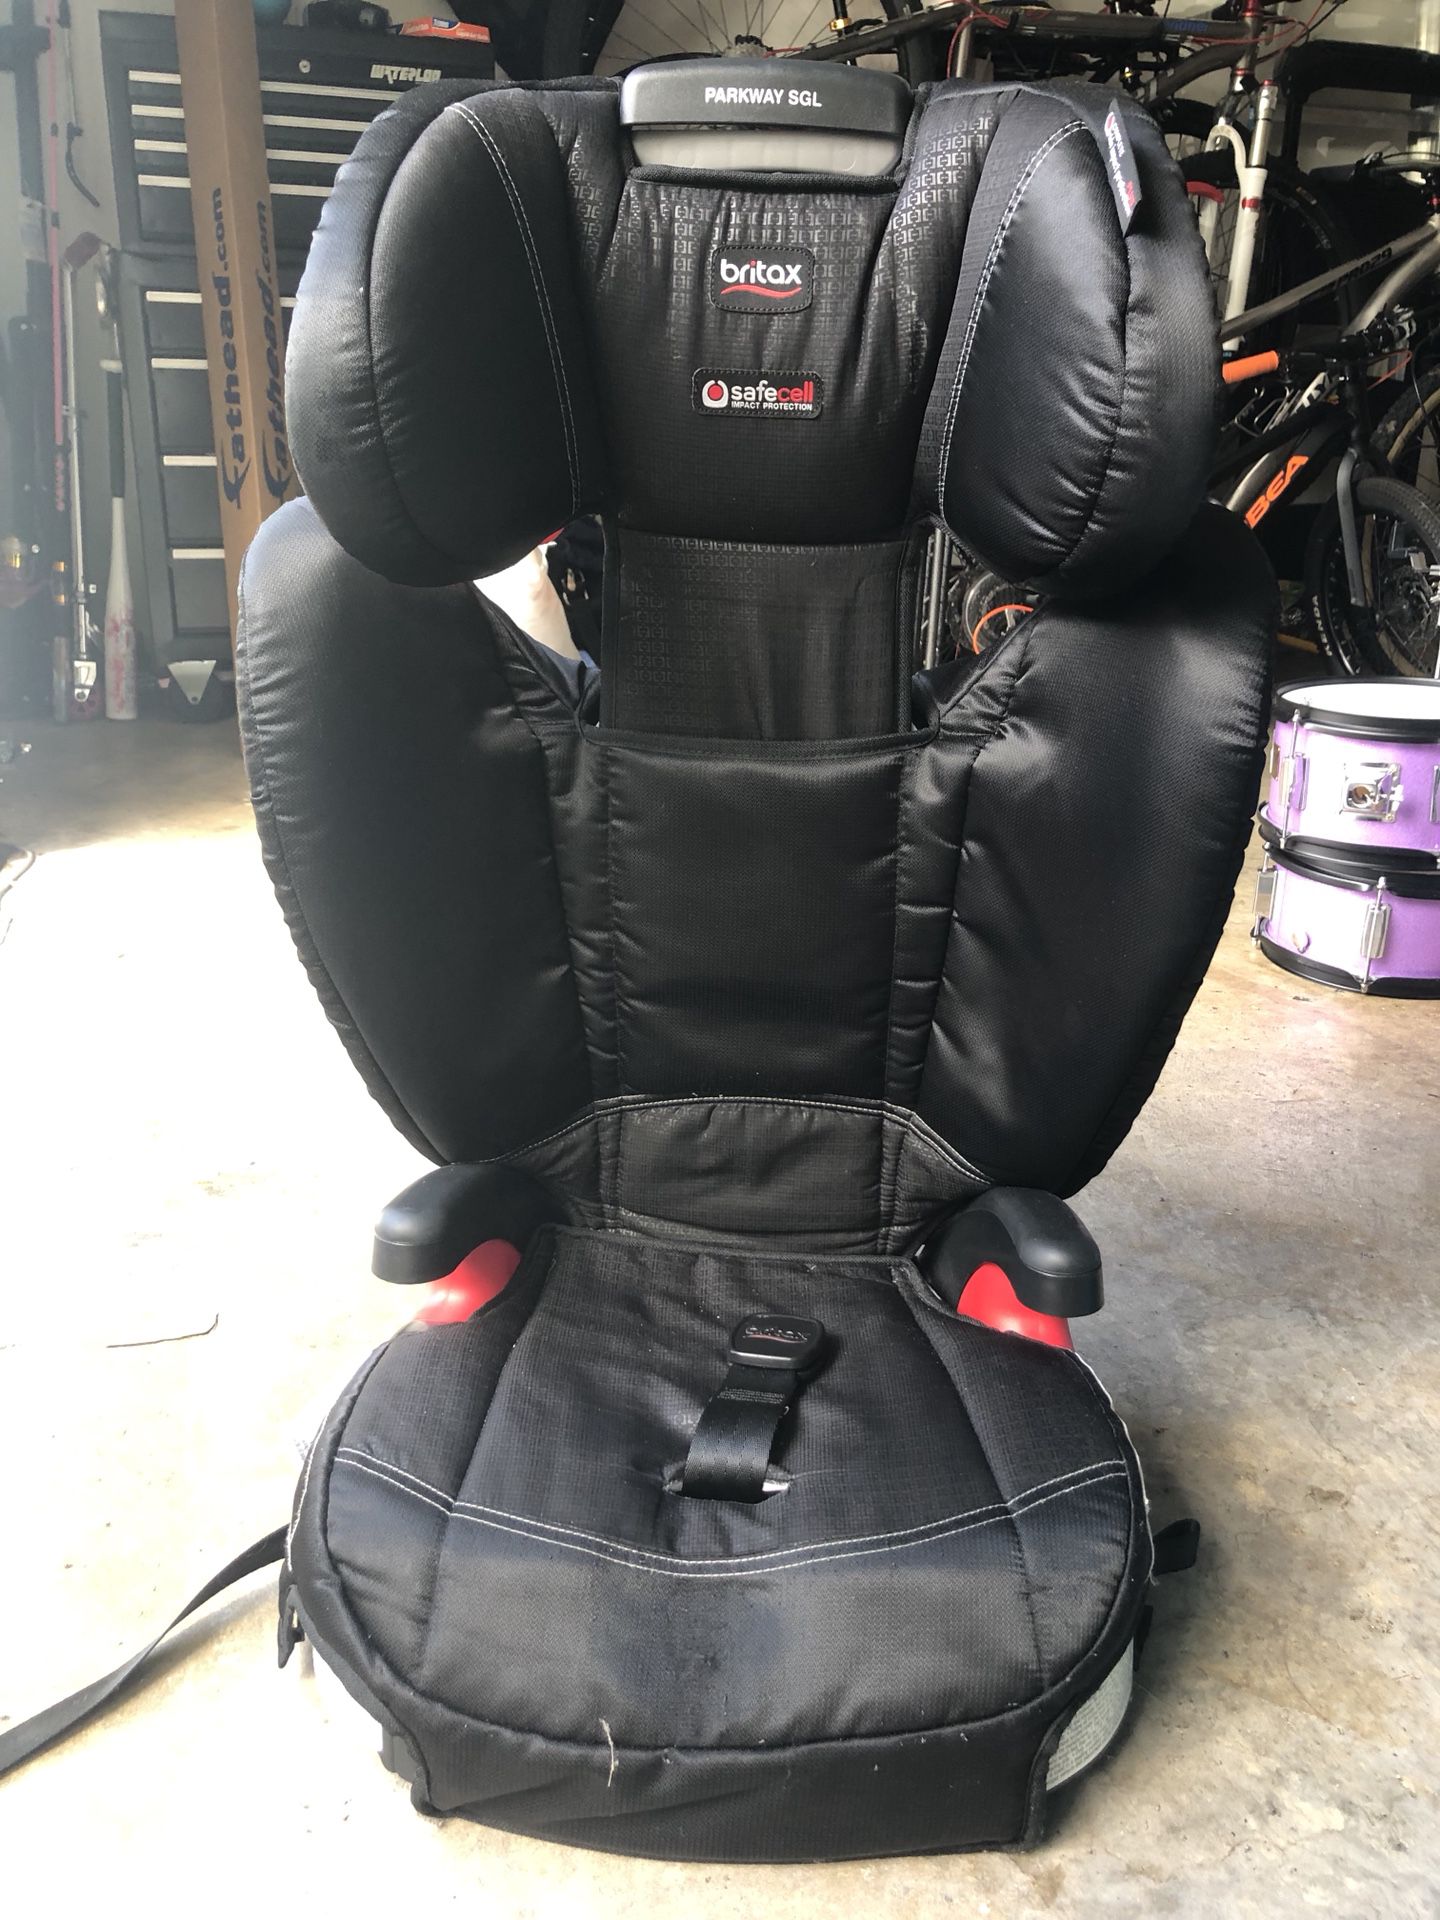 Britax parkway SGL booster seat (two available) fits kids from 40-100 lbs.